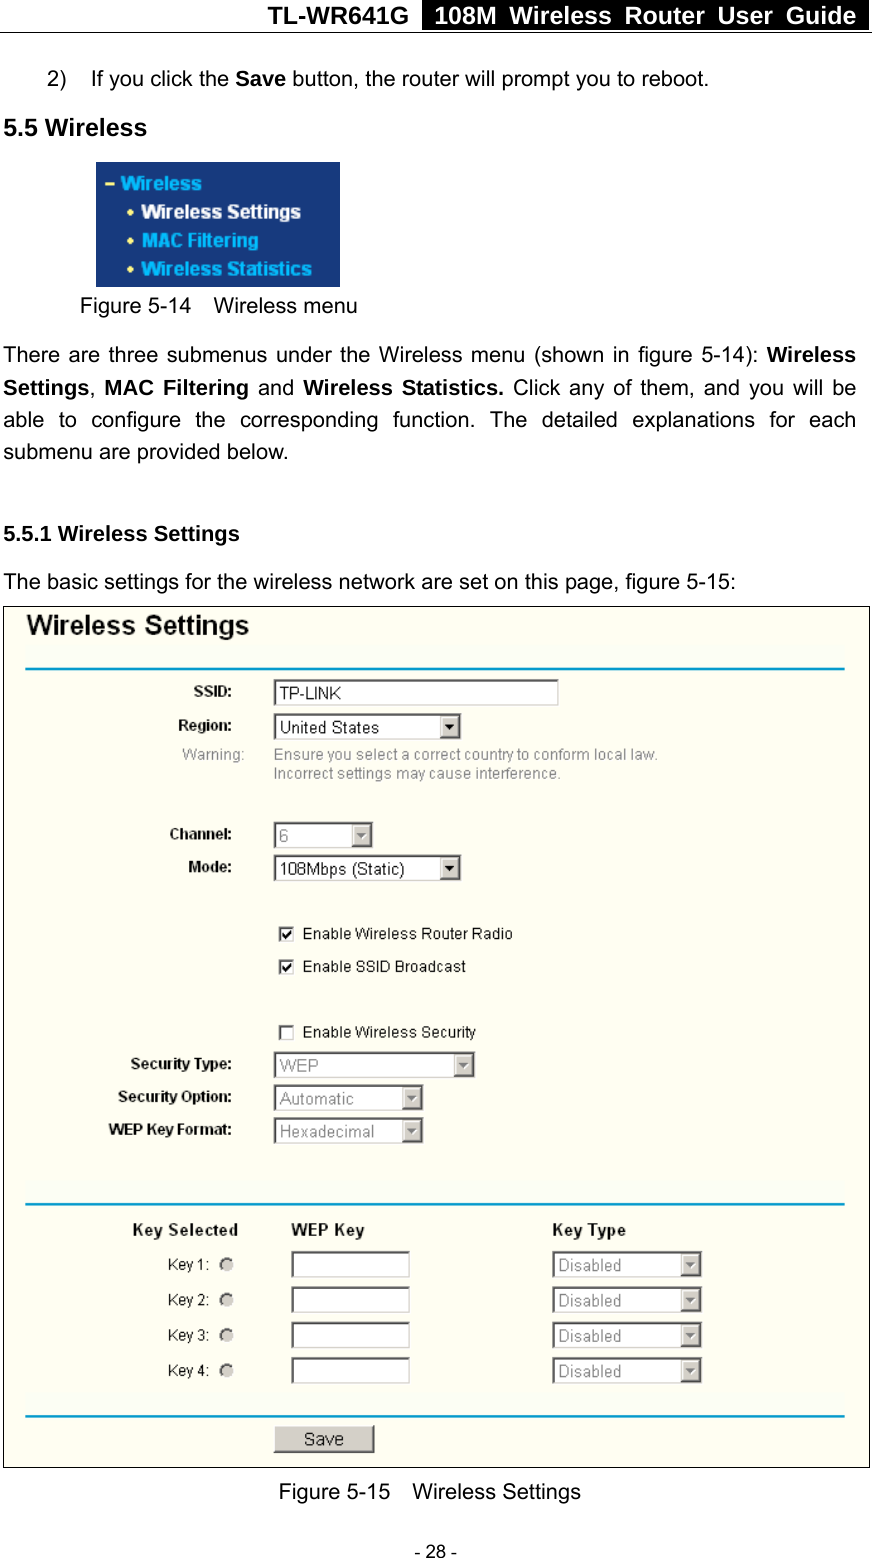 TL-WR641G   108M Wireless Router User Guide  2)  If you click the Save button, the router will prompt you to reboot. 5.5 Wireless  Figure 5-14  Wireless menu There are three submenus under the Wireless menu (shown in figure 5-14): Wireless Settings, MAC Filtering and Wireless Statistics. Click any of them, and you will be able to configure the corresponding function. The detailed explanations for each submenu are provided below.  5.5.1 Wireless Settings The basic settings for the wireless network are set on this page, figure 5-15:  Figure 5-15  Wireless Settings  - 28 - 